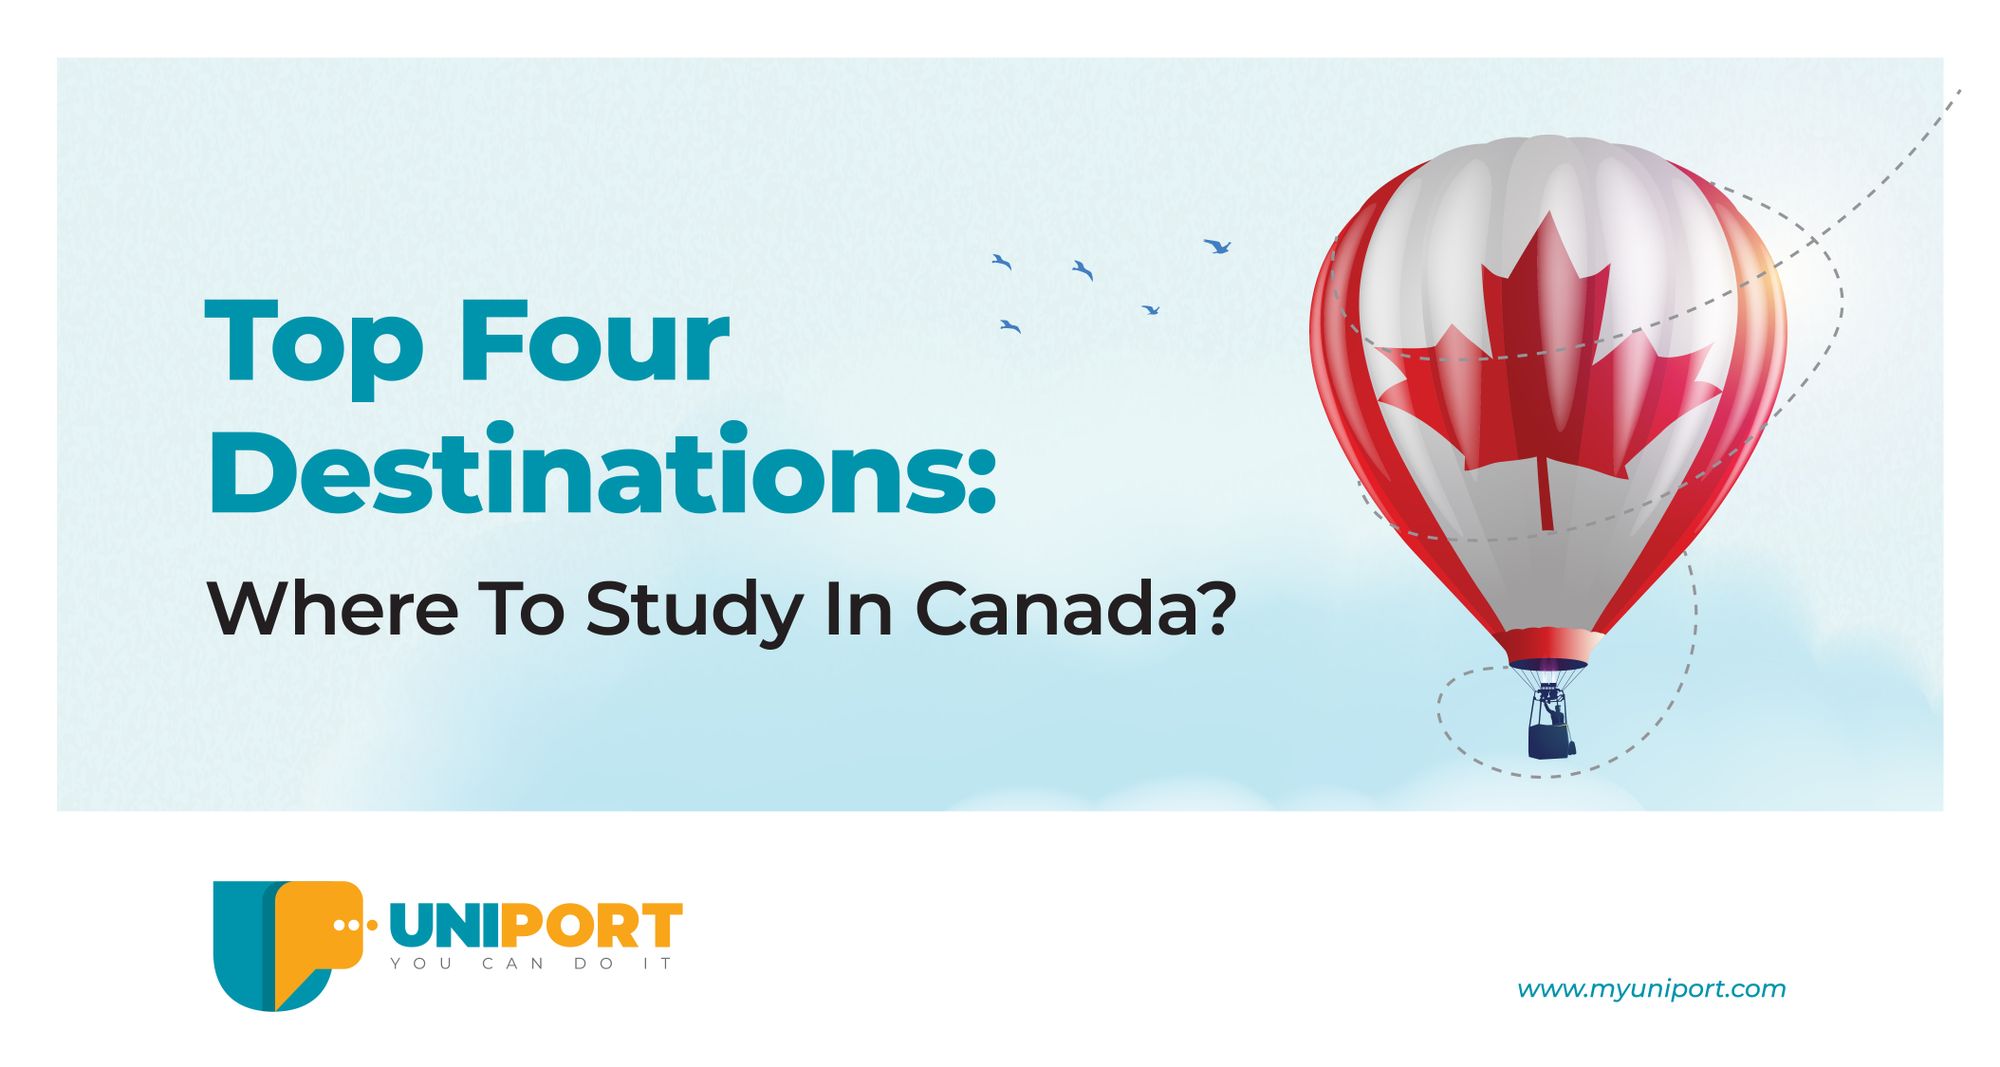 Top Four Destinations: Where To Study In Canada?